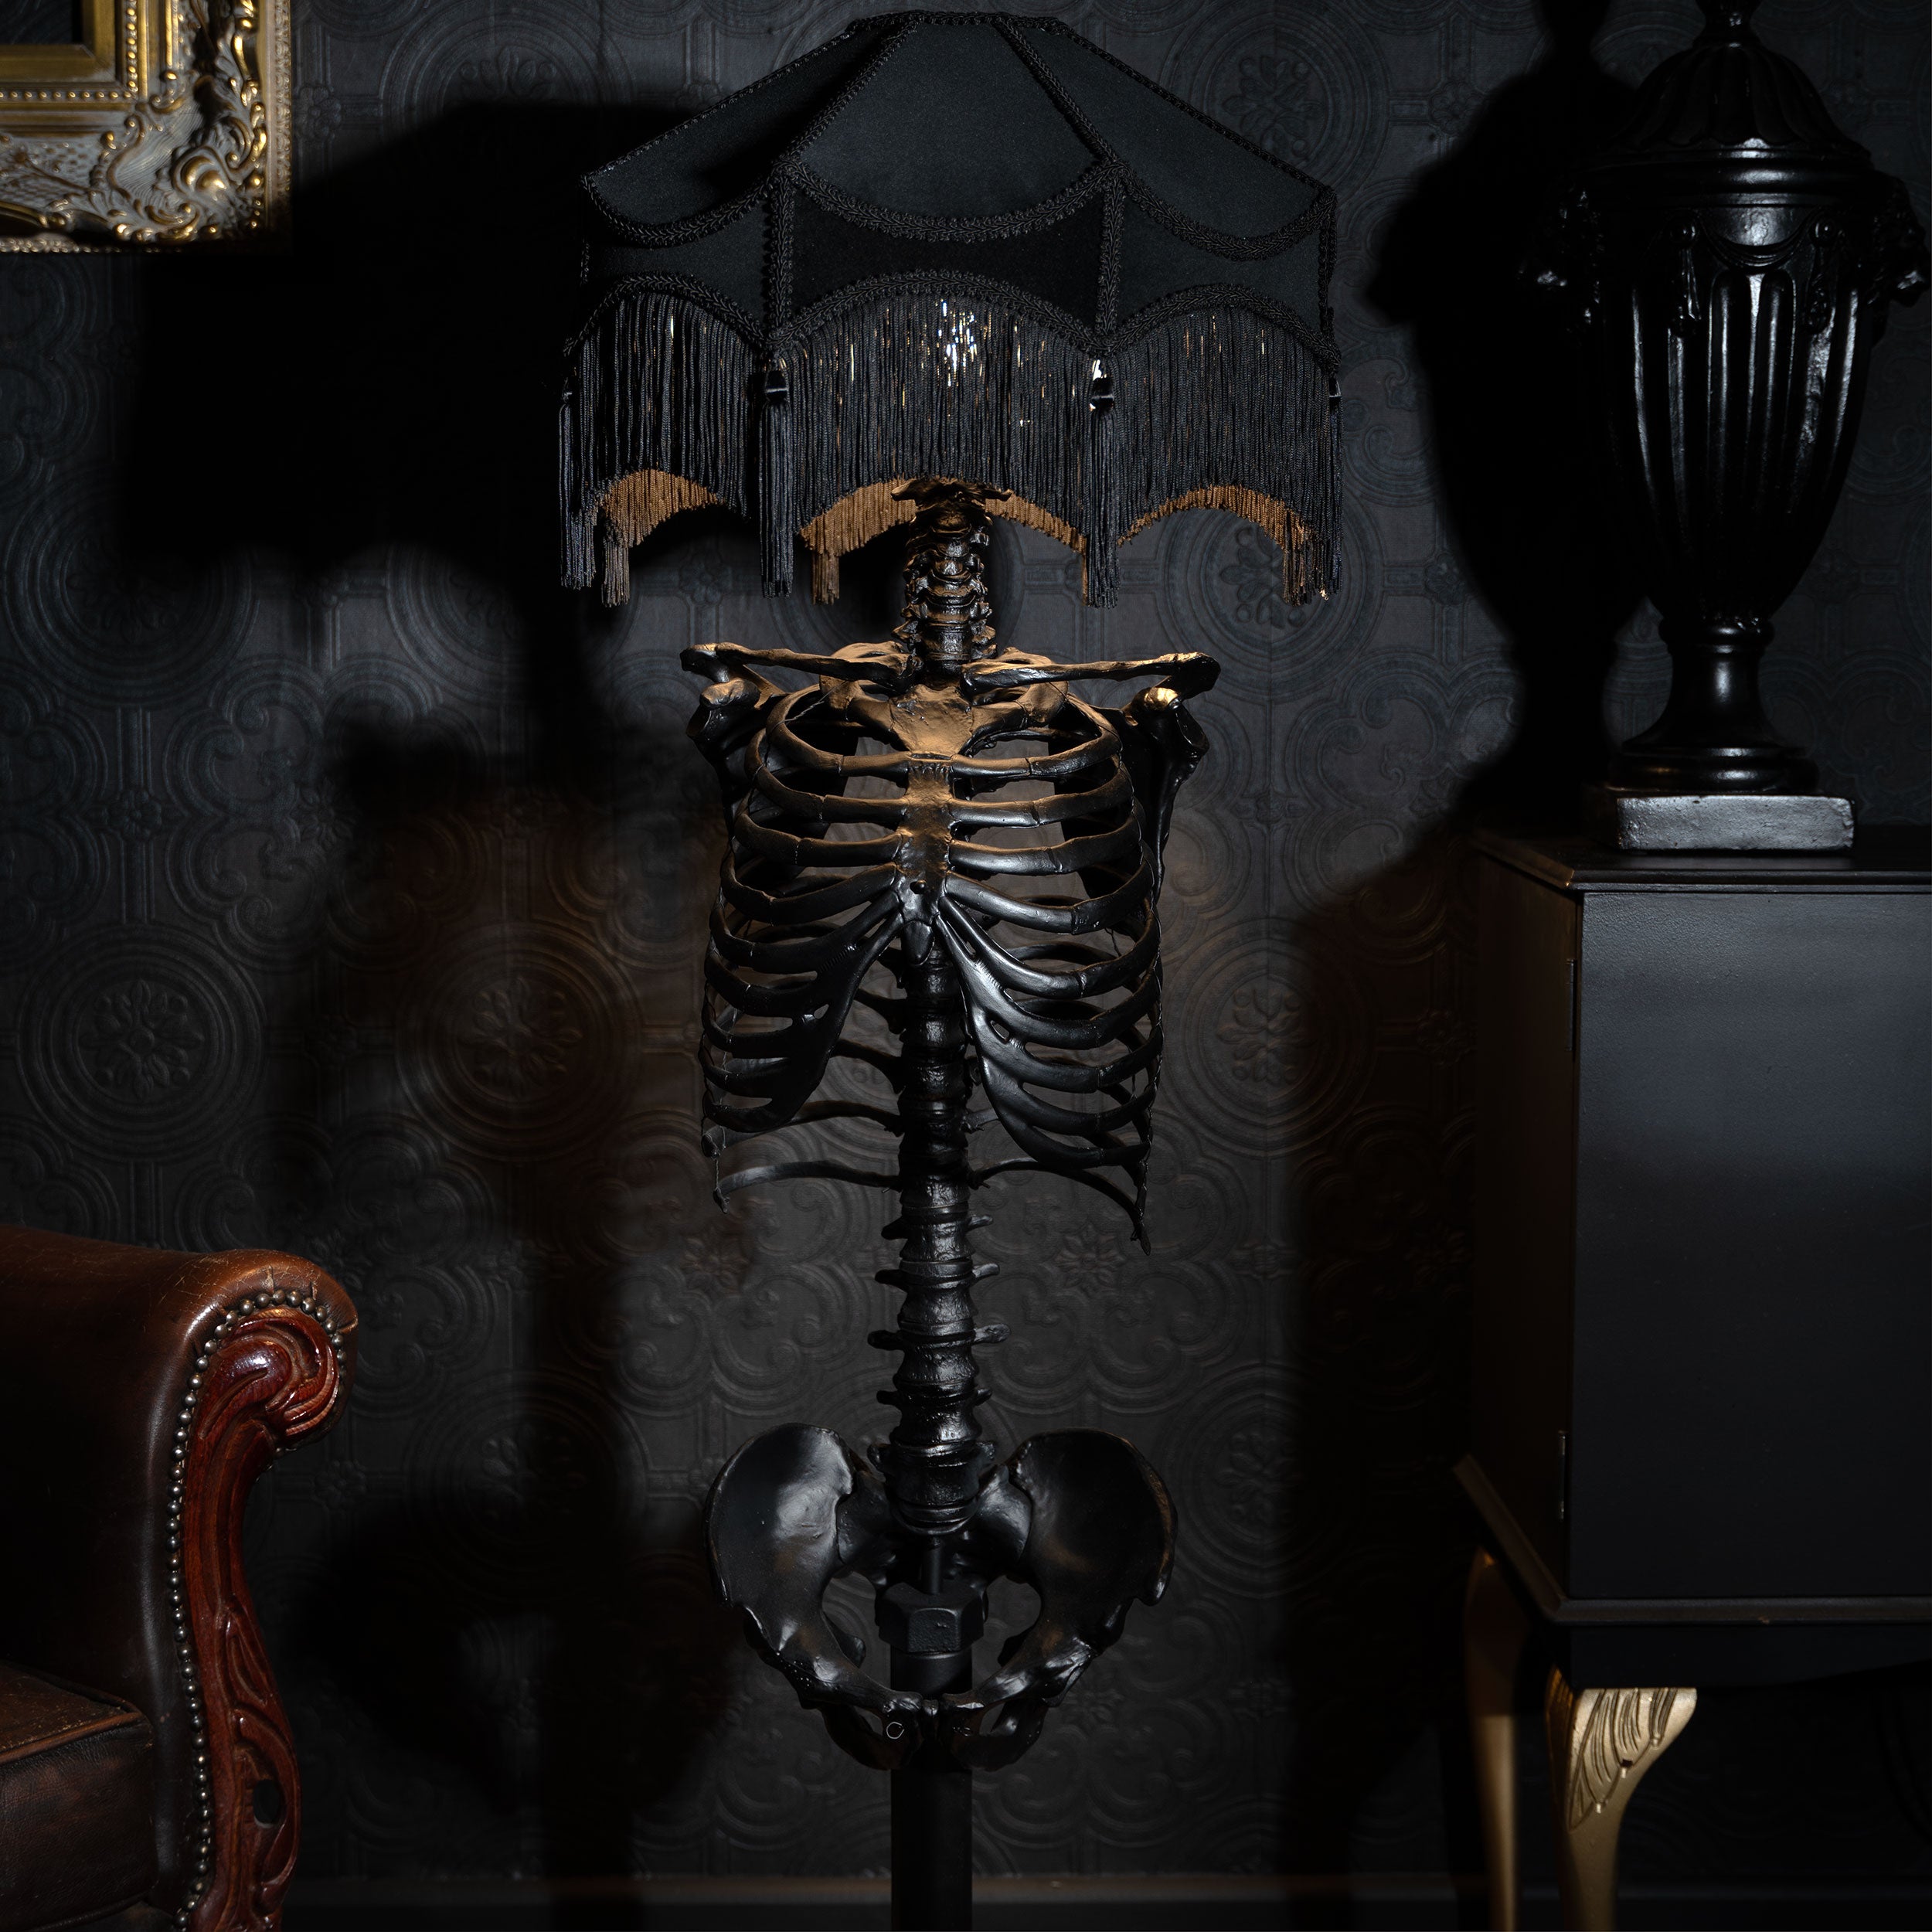 The Skeleton Floor Lamp - Jetta Baroque Edition by The Blackened Teeth